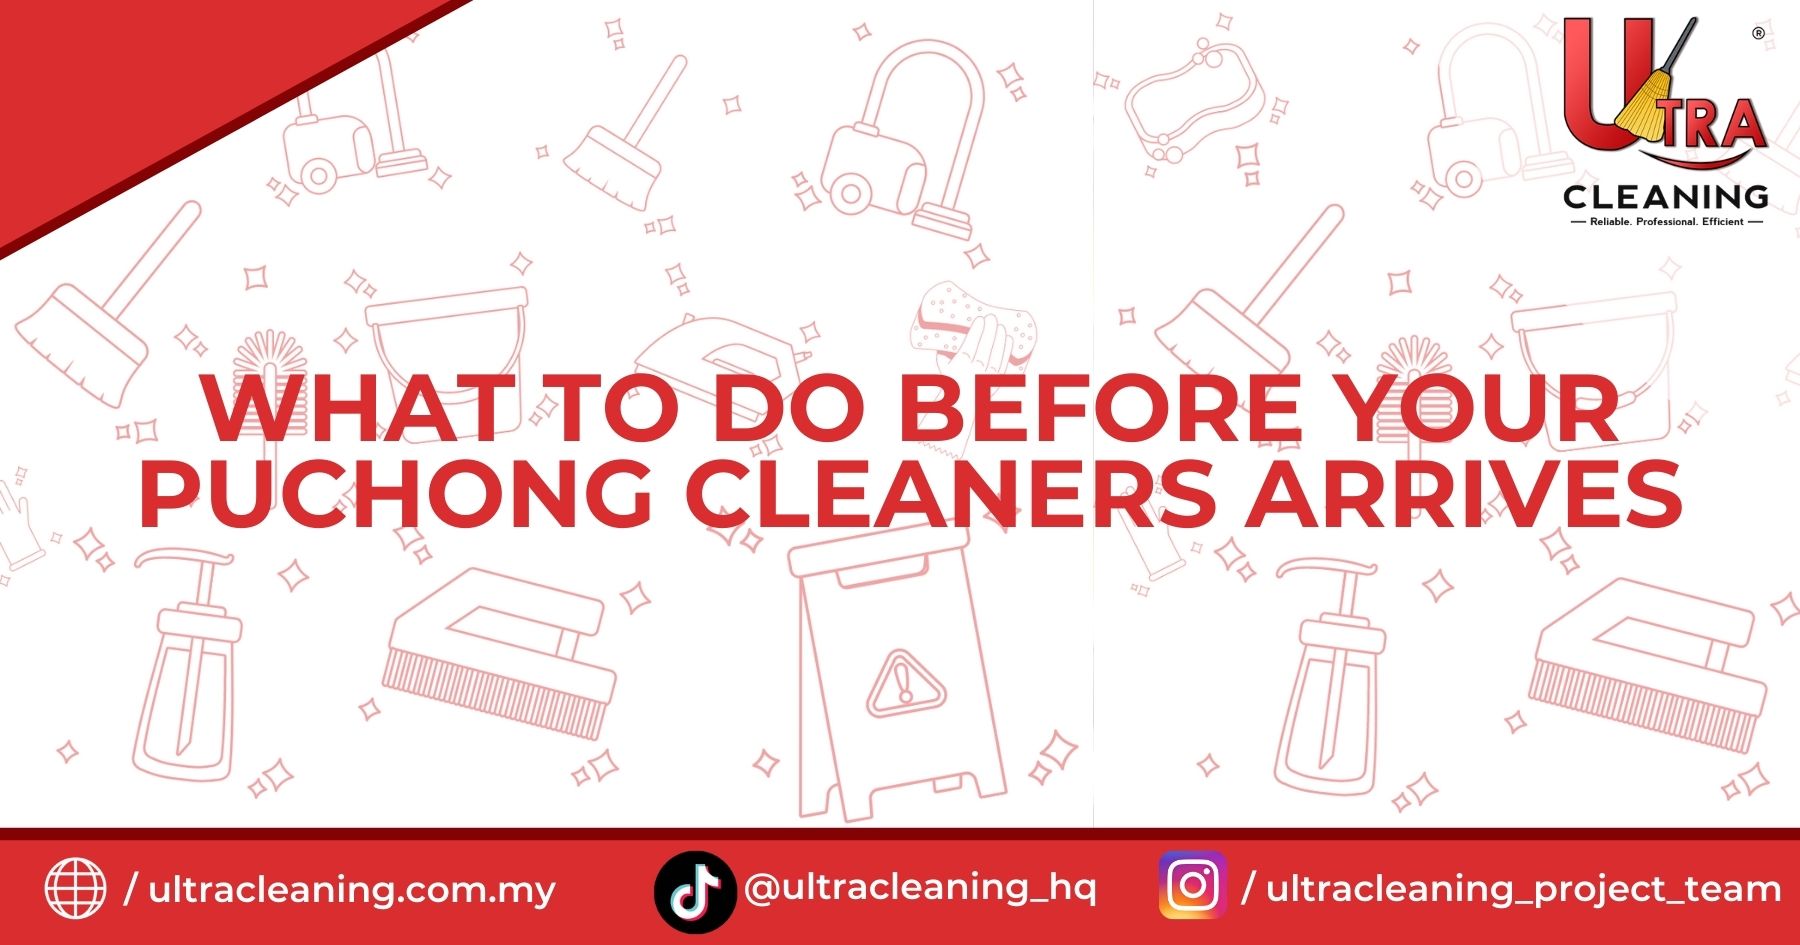 What To Do Before Your Puchong Cleaners Arrives